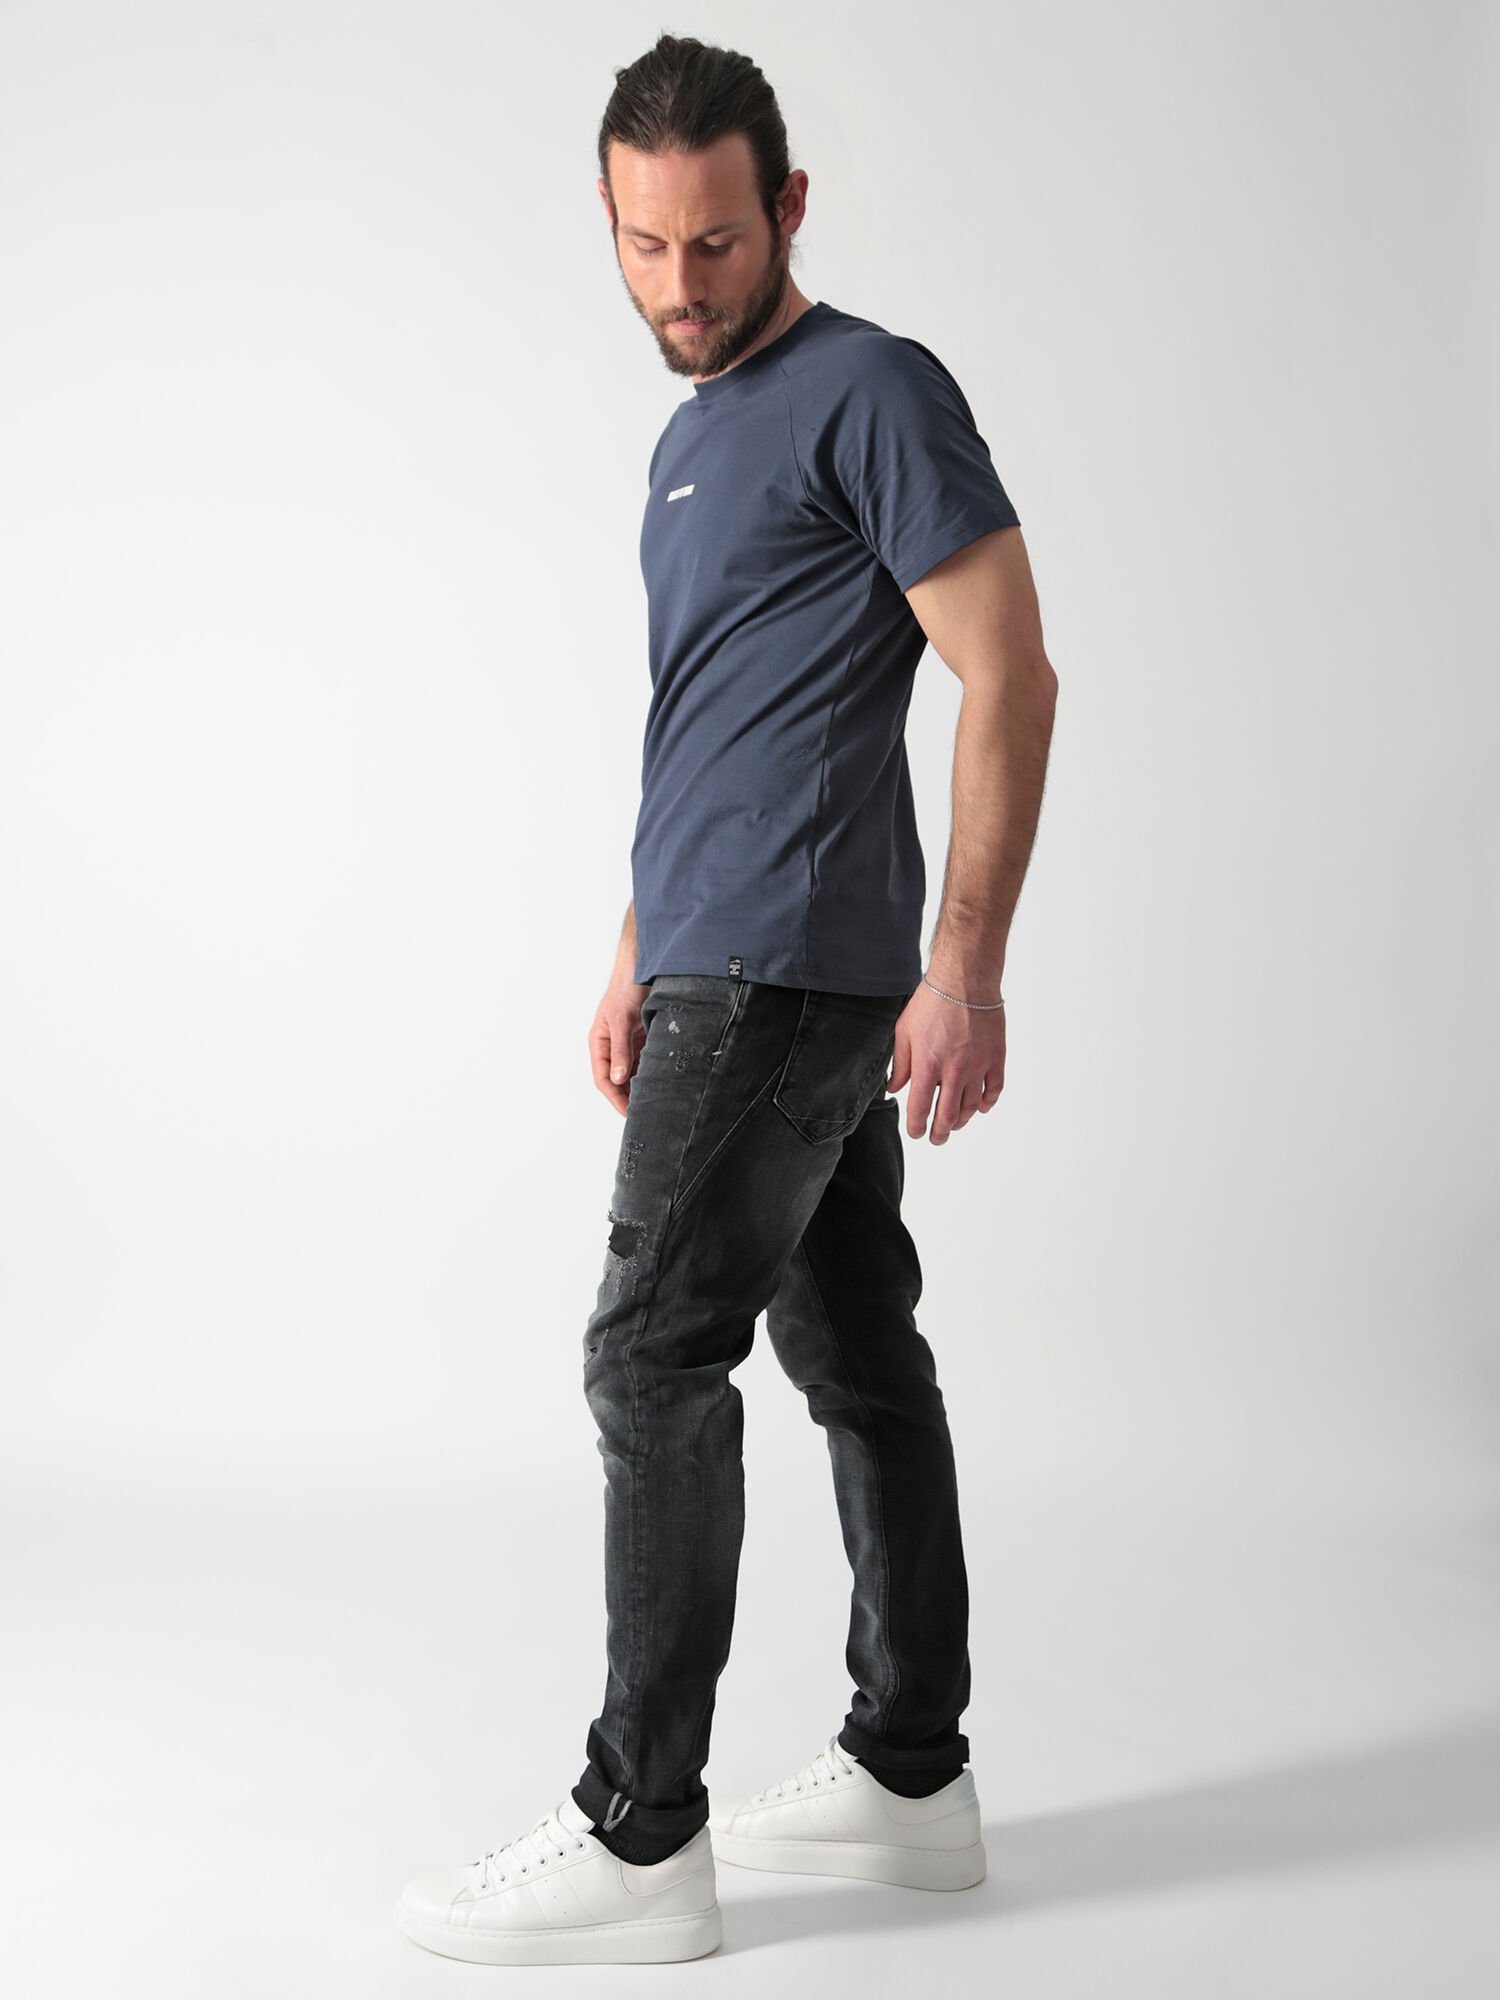 Tapered-fit-Jeans of Tragekomfort Black Angenehmer Alvin Miracle Denim Noughty